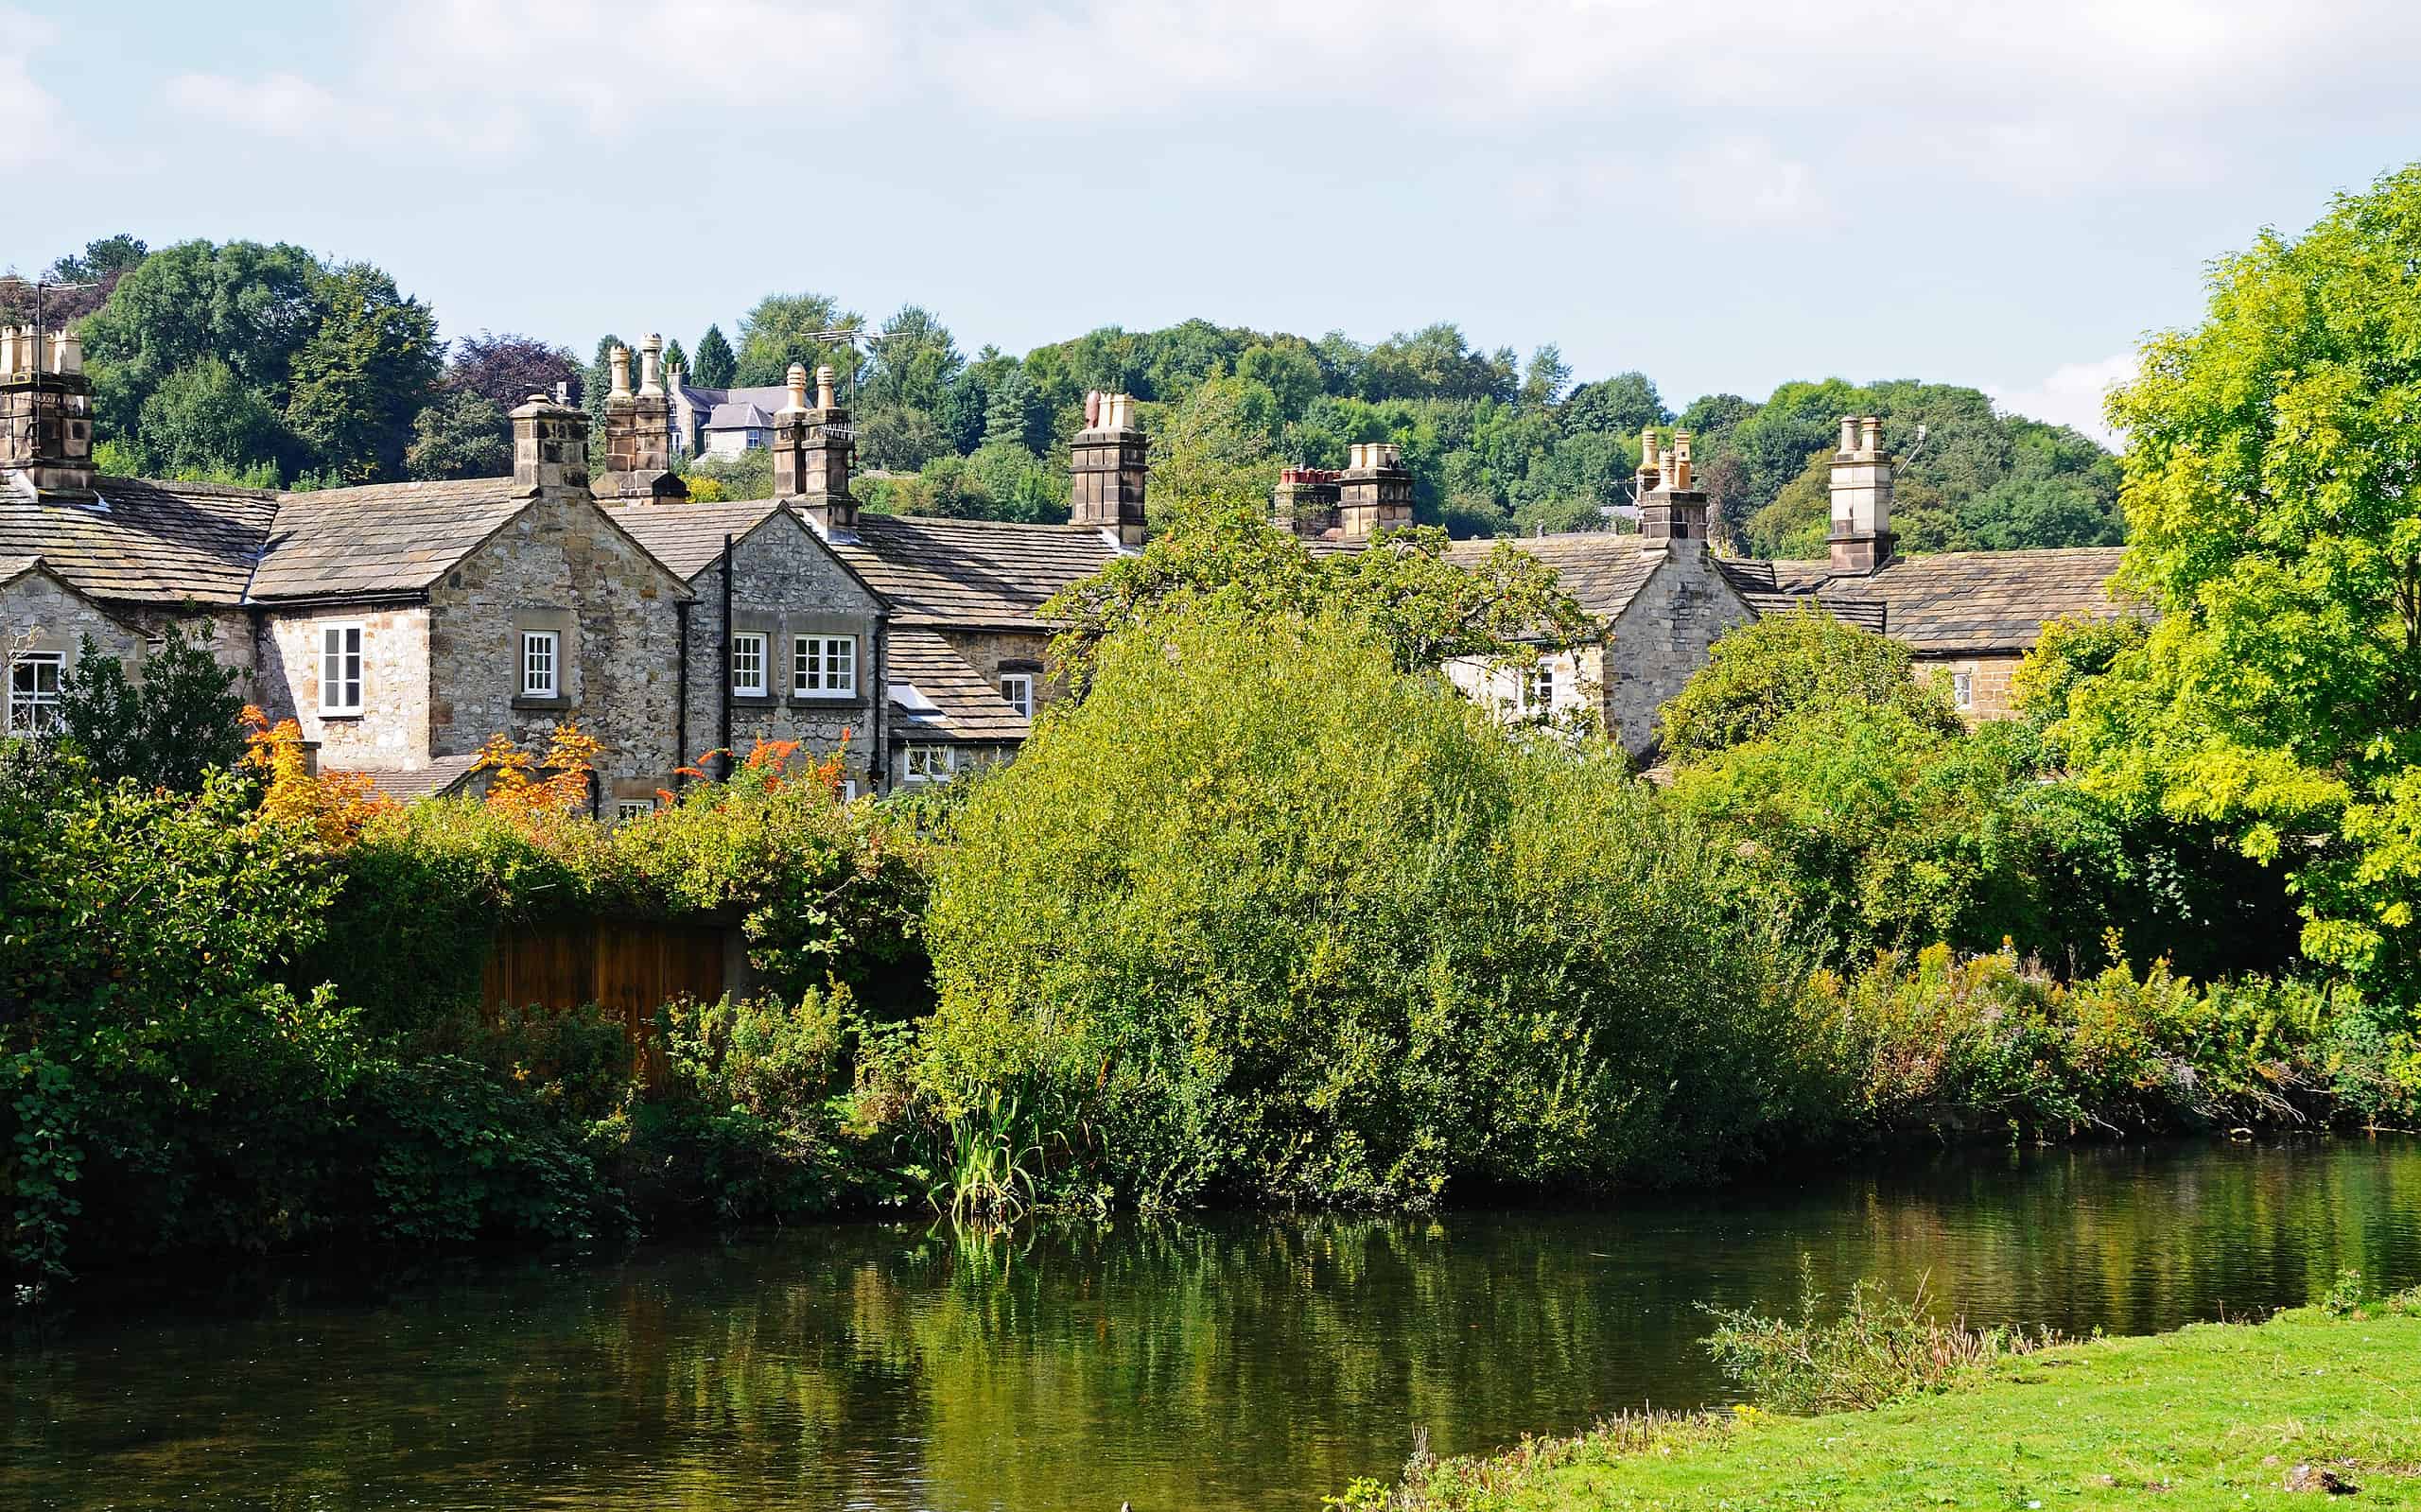 Cottages alongside the River Wye, Bakewell.